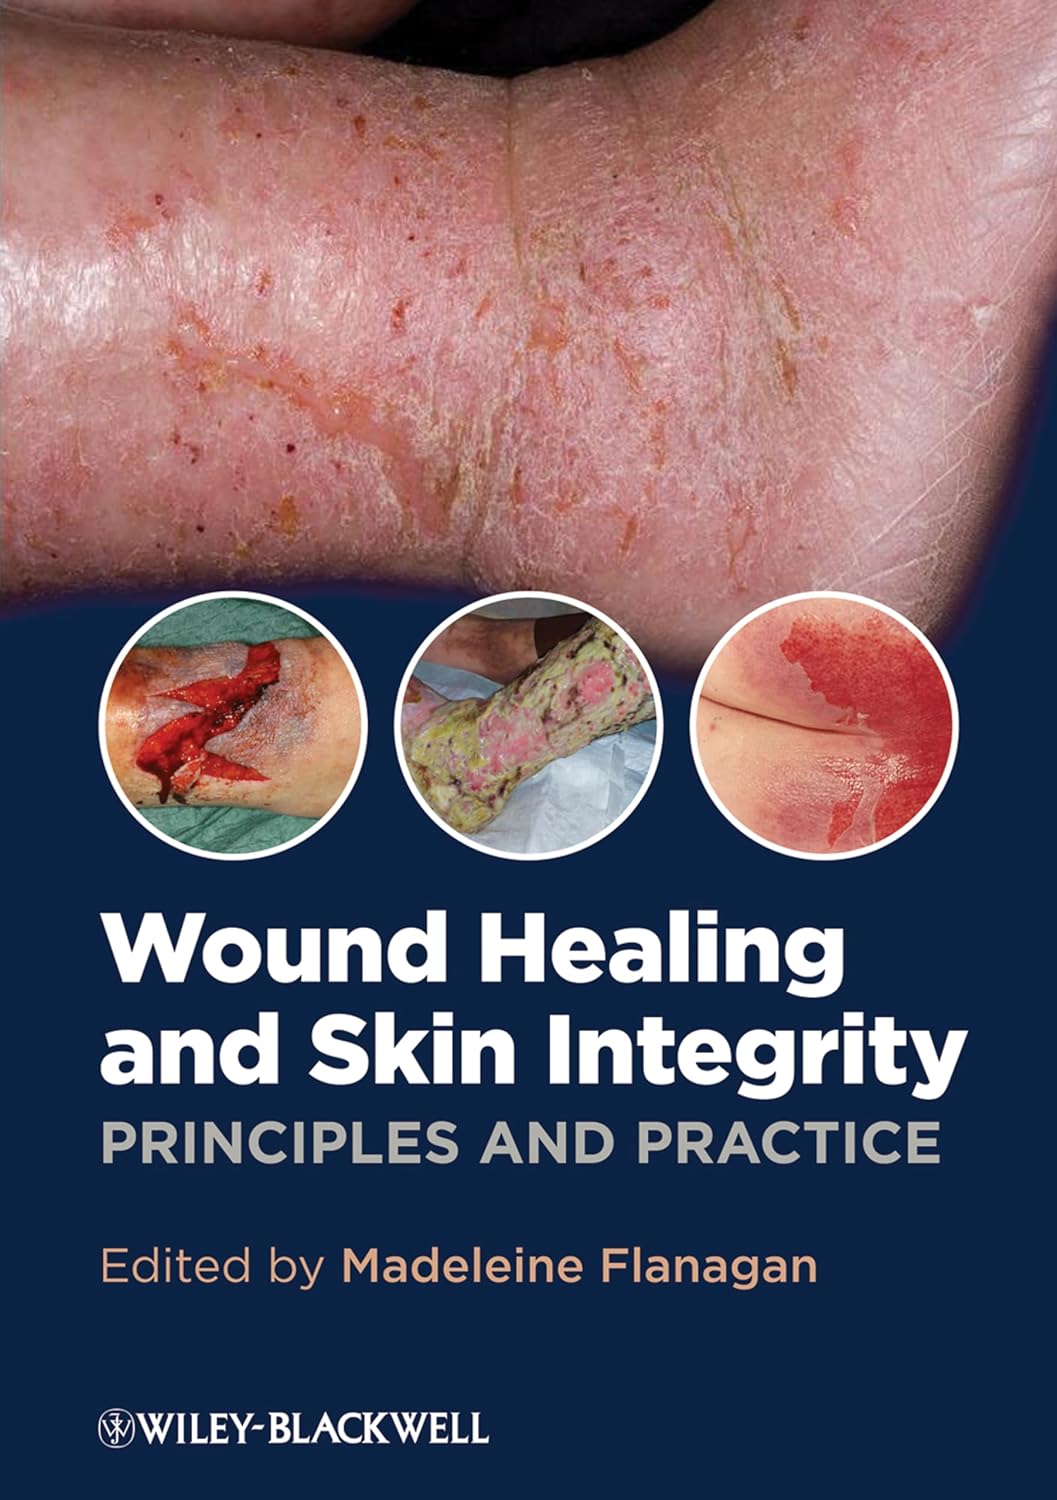 (EBook PDF)Wound Healing and Skin Integrity Principles and Practice 1st Edition by Madeleine Flanagan